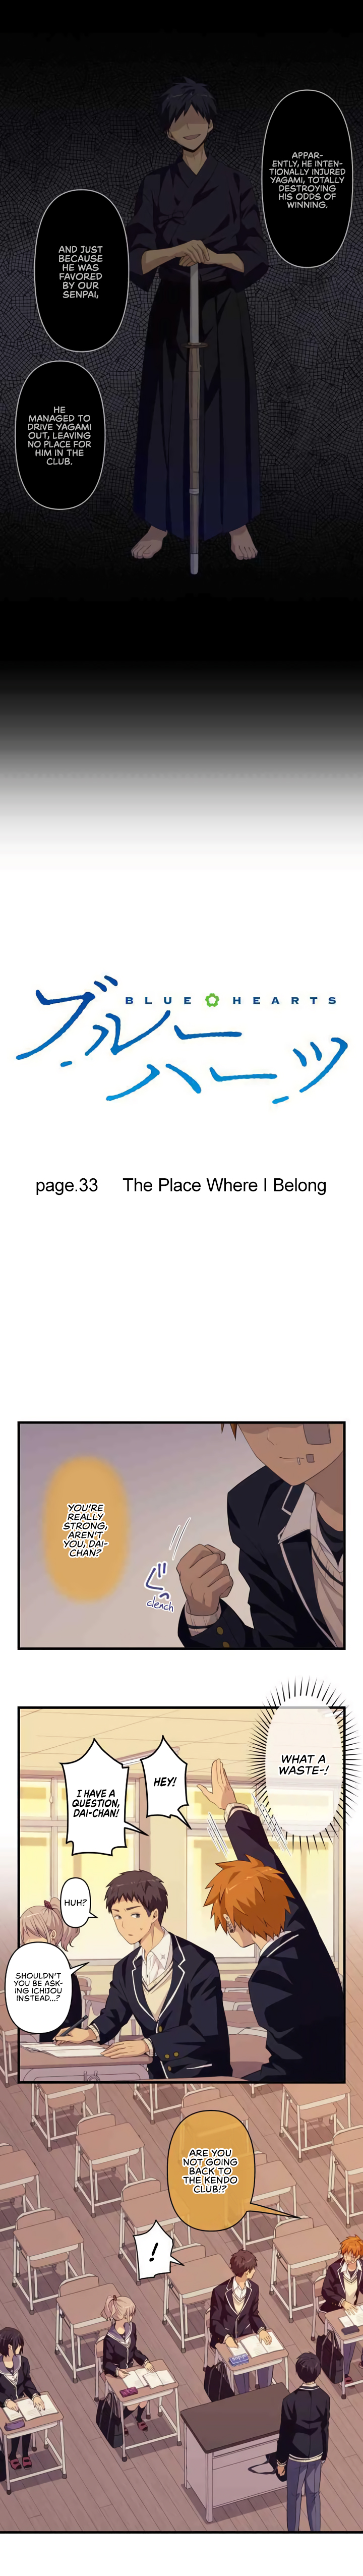 Blue Hearts Ch. 33 The Place Where I Belong